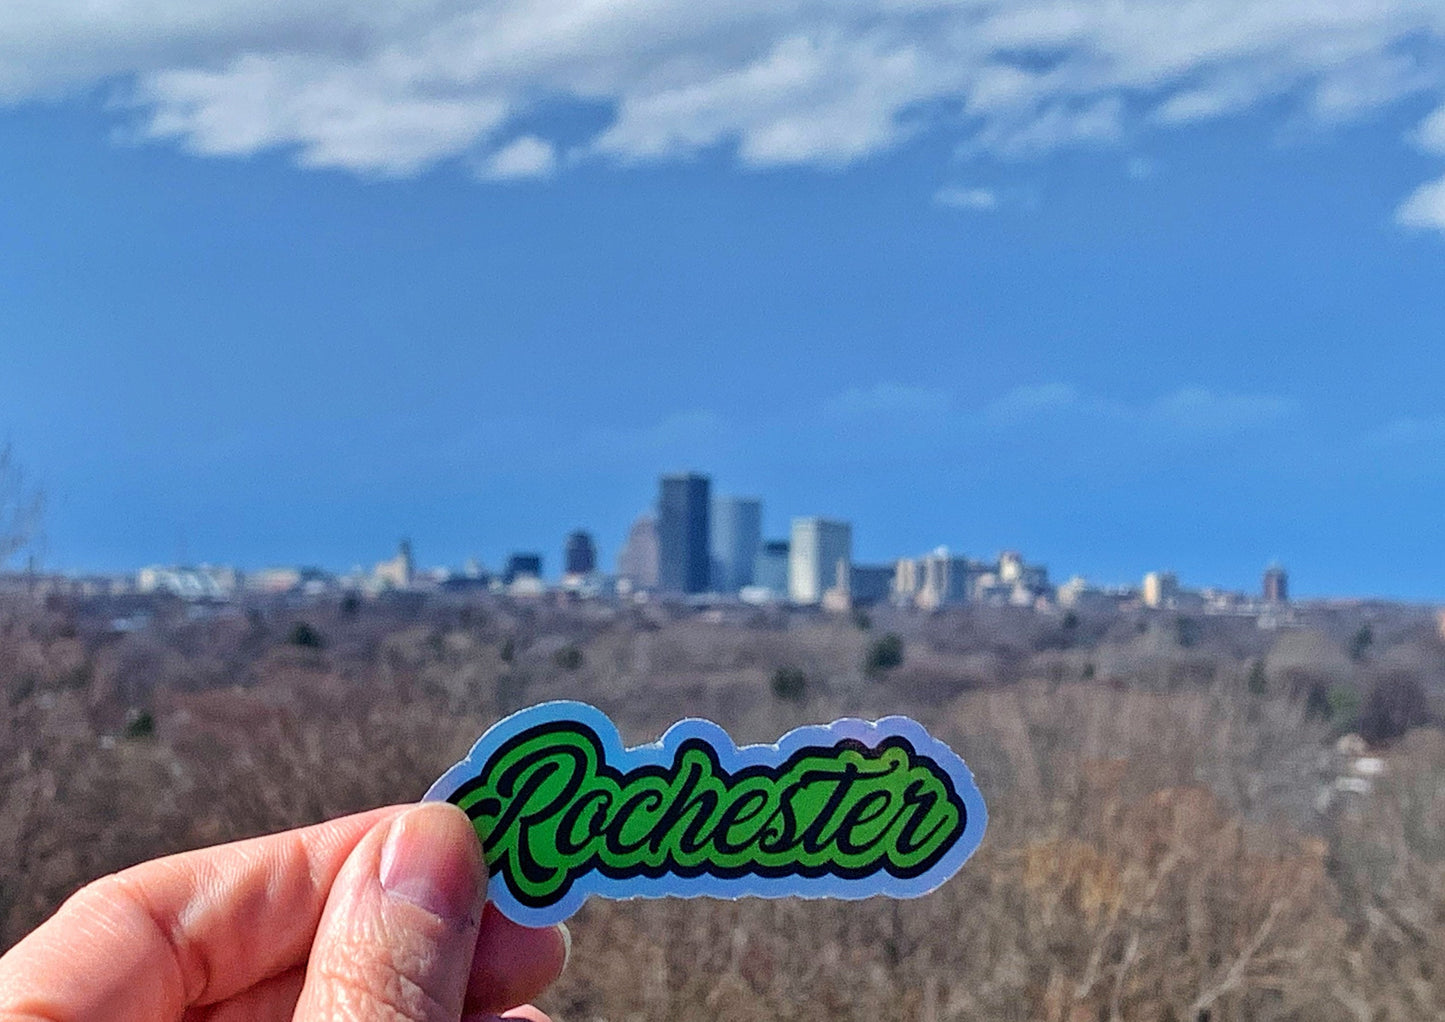 Holographic Rochester, Waterproof Sticker Decal